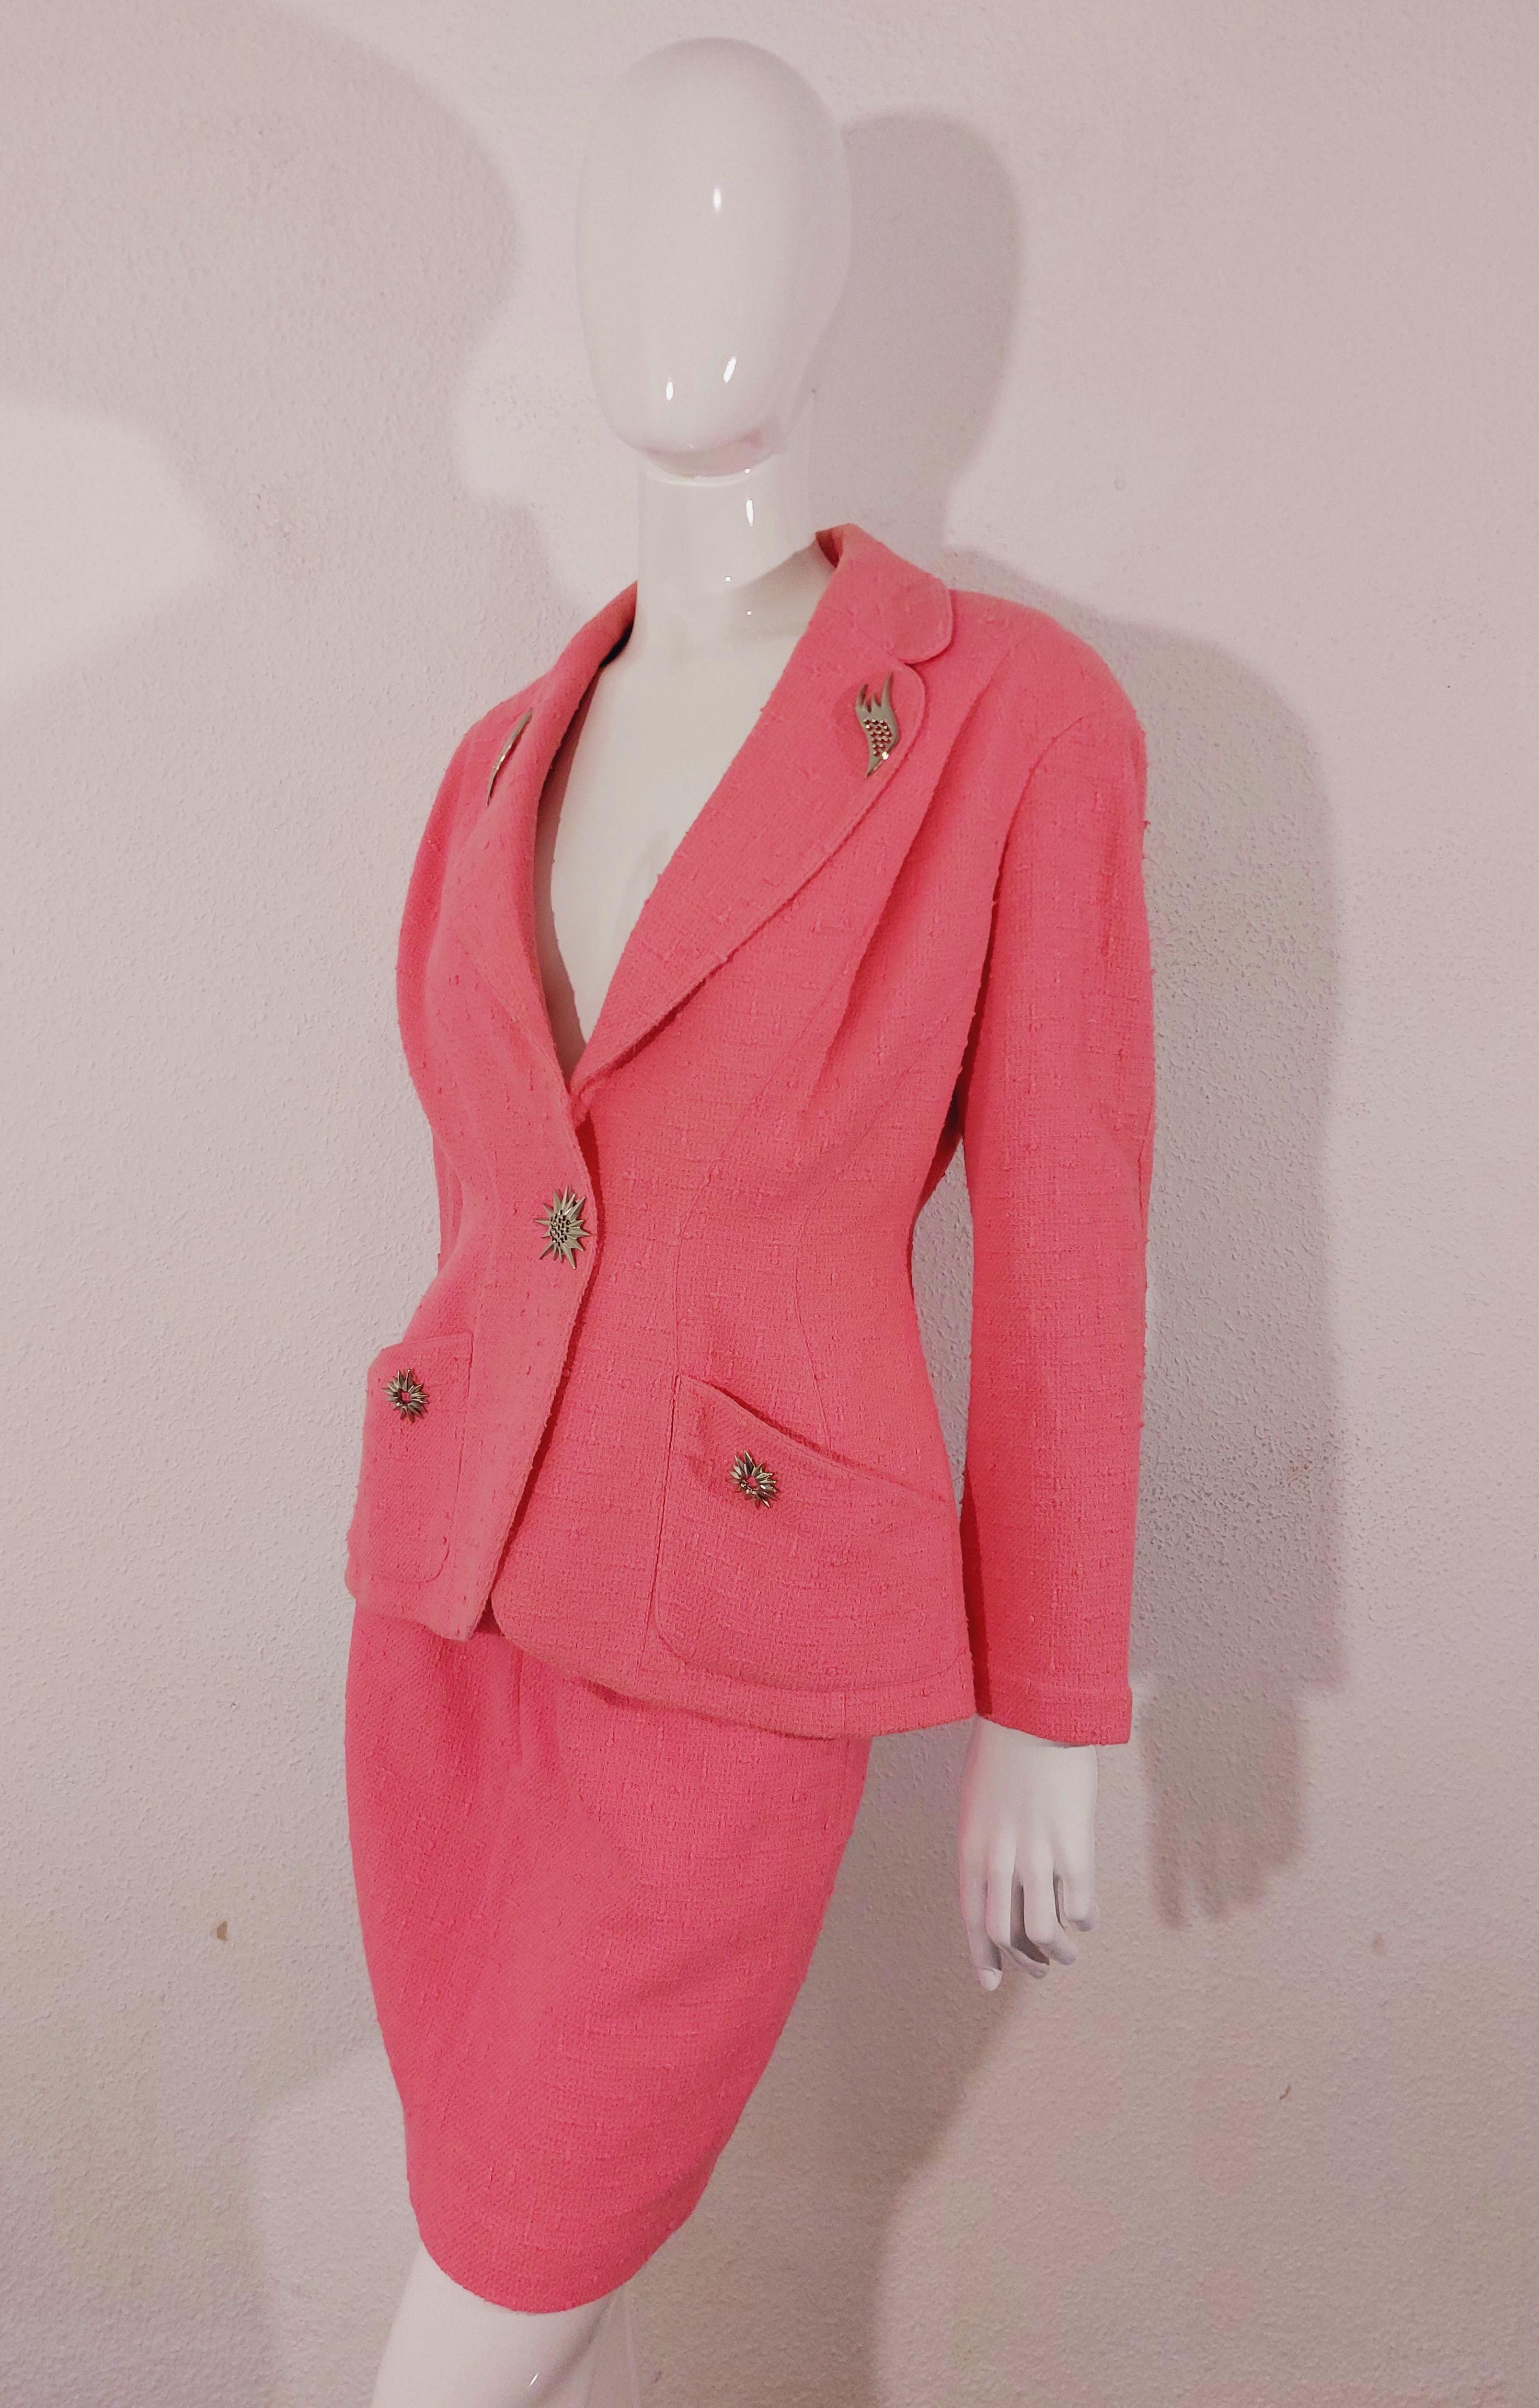 Thierry Mugler Couture Brooch FW 1990 Pin Pink Badge Blazer Skirt Suit Set For Sale 9